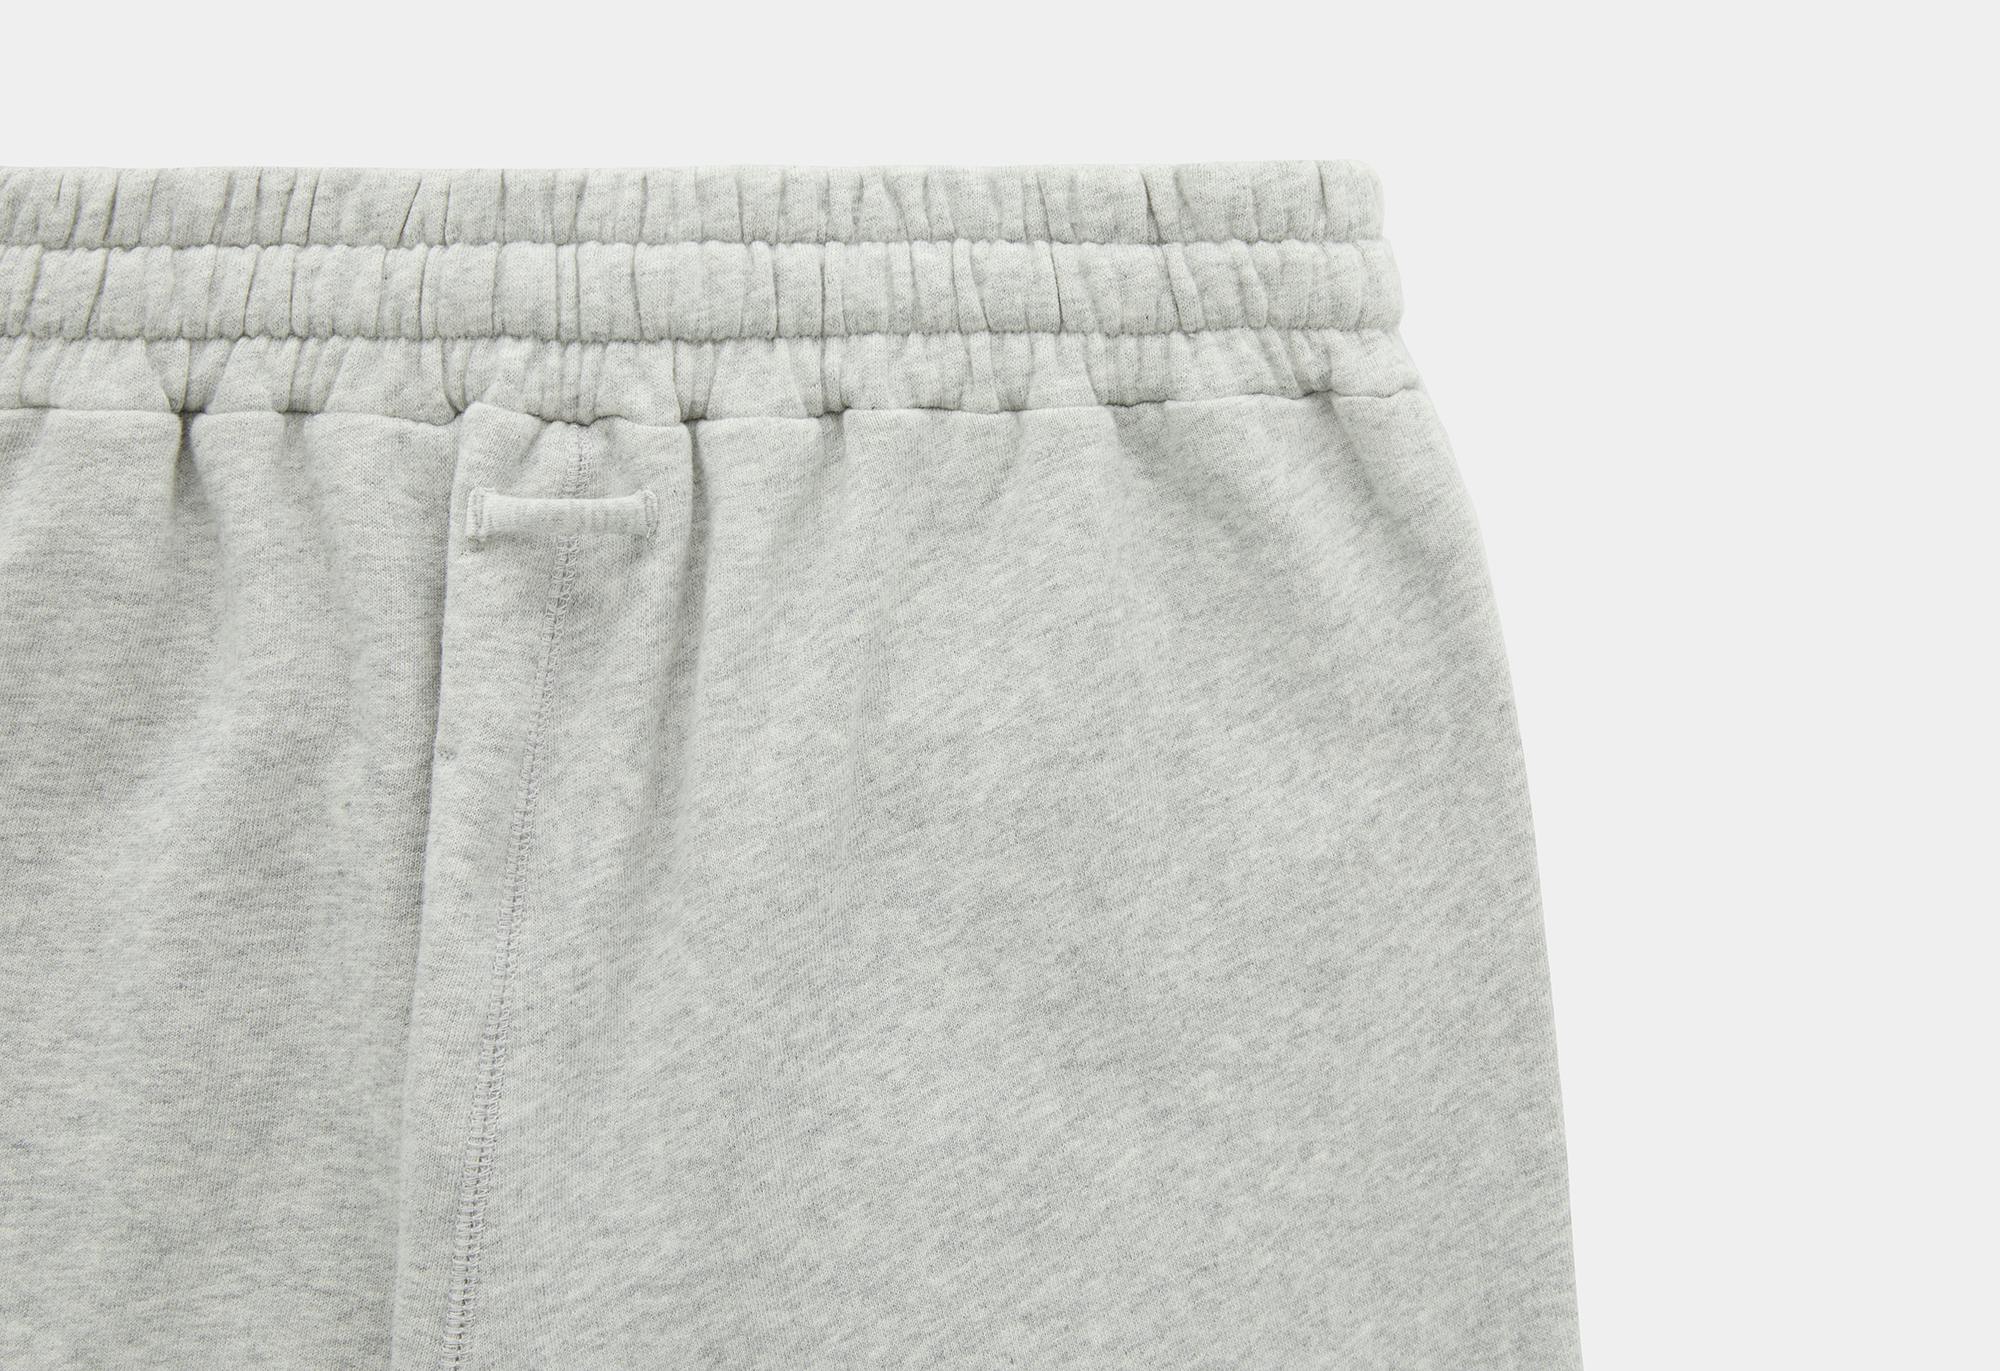 Lounge Leisure Sweatpants Waistband in Grey Color